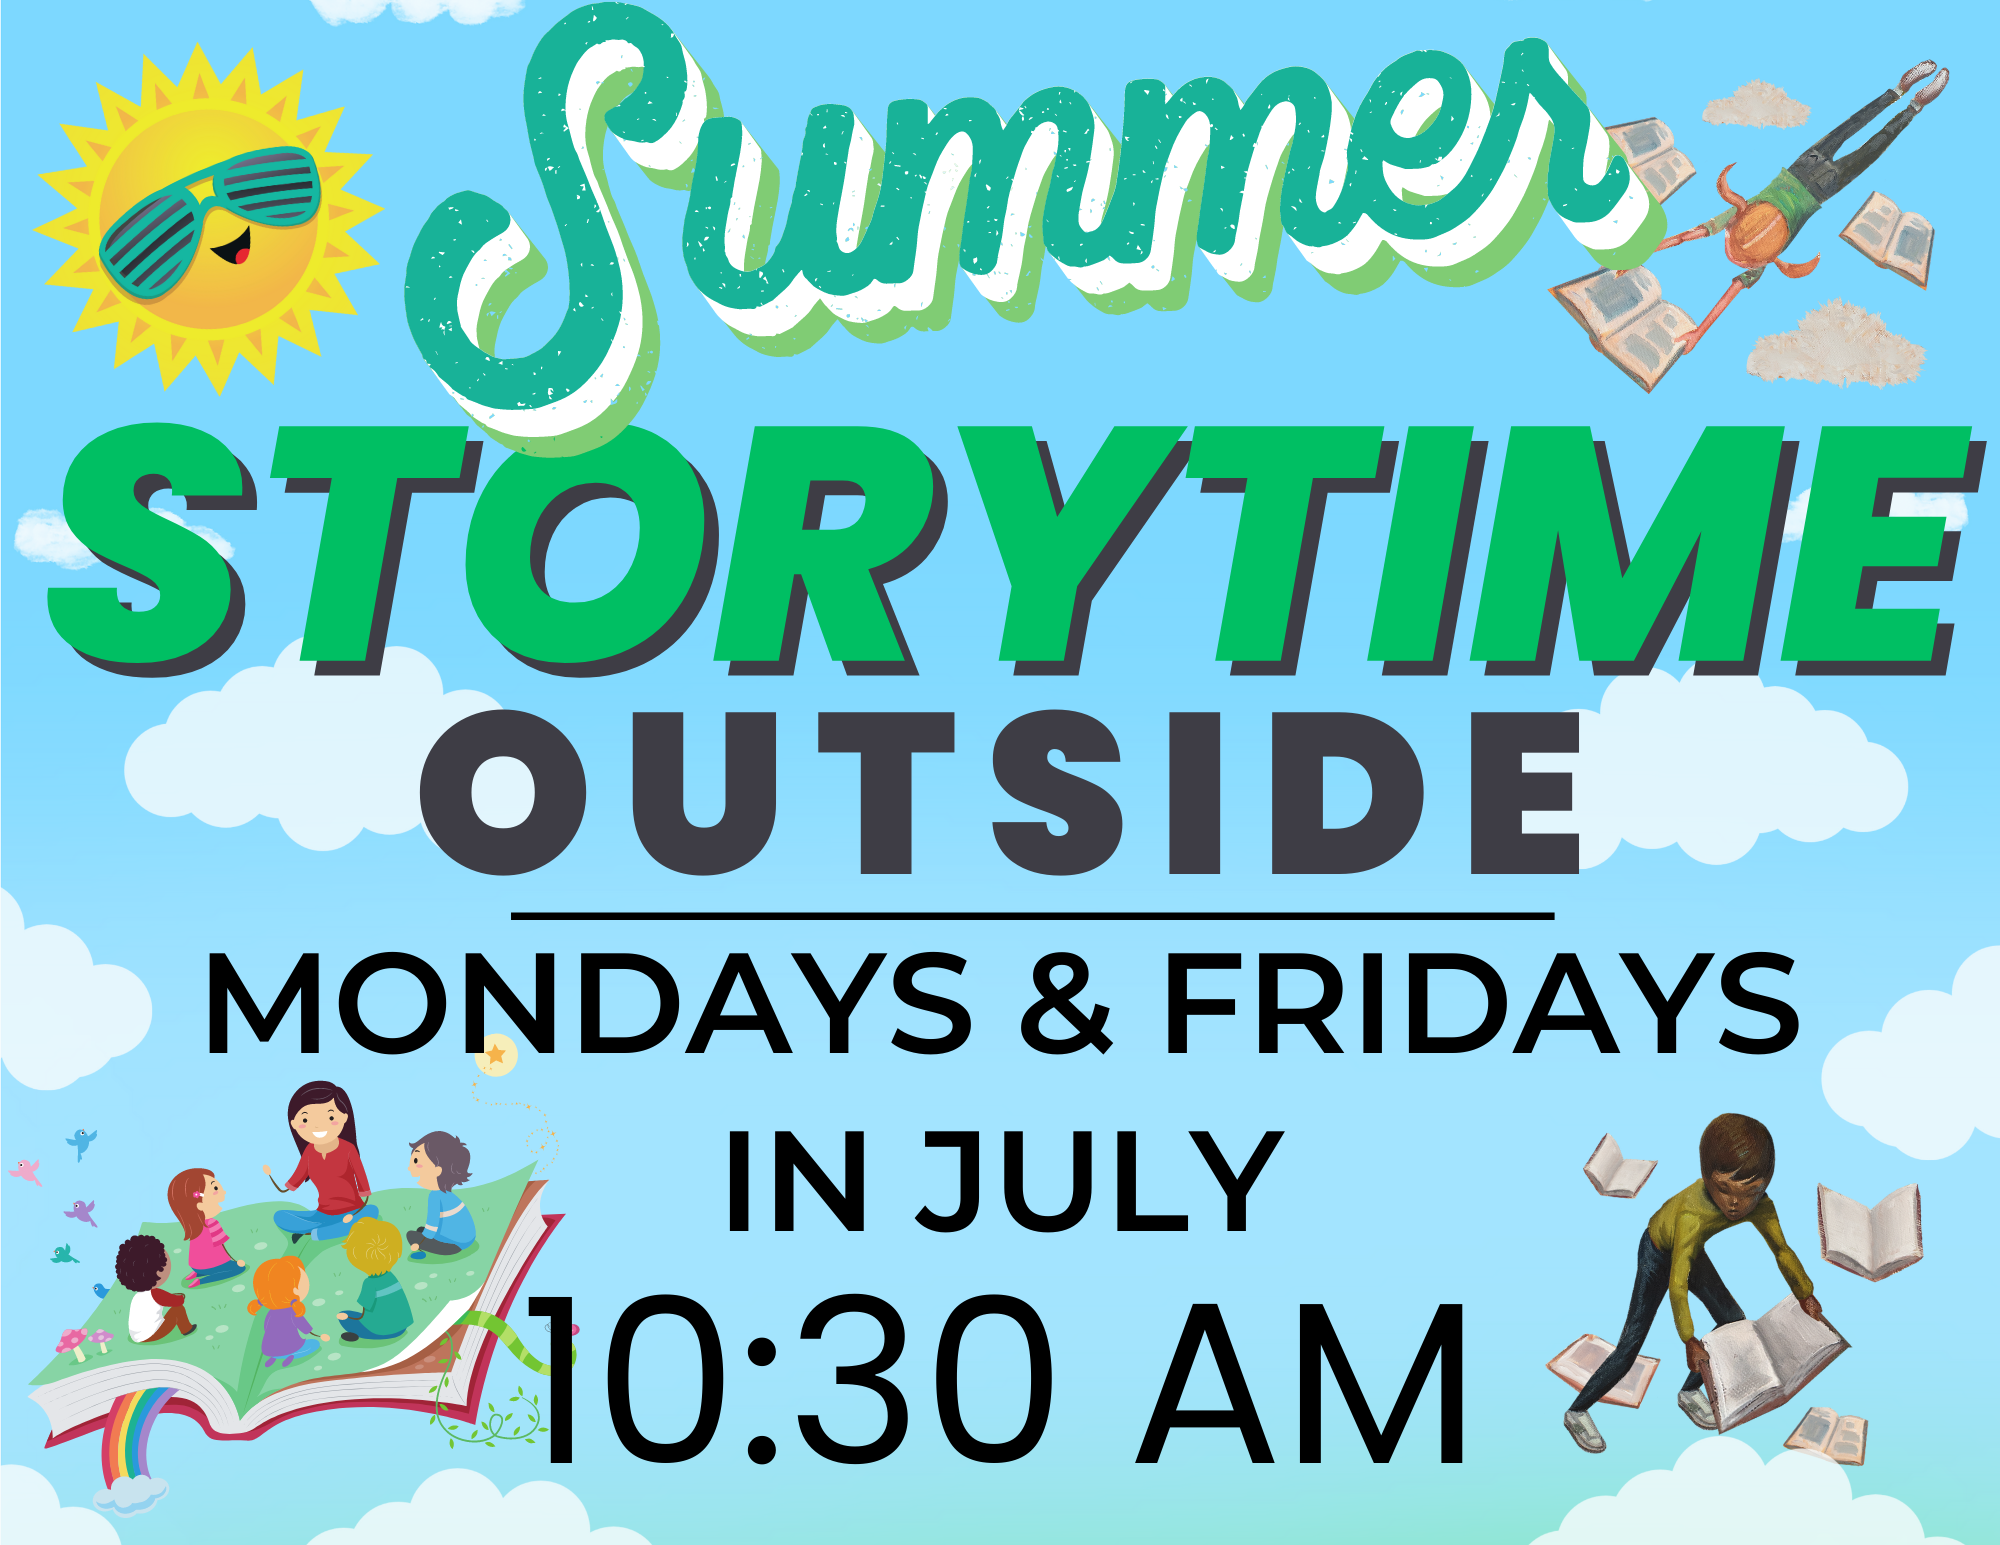 Summer storytime outside Mondays & Fridays in July 10:30 AM